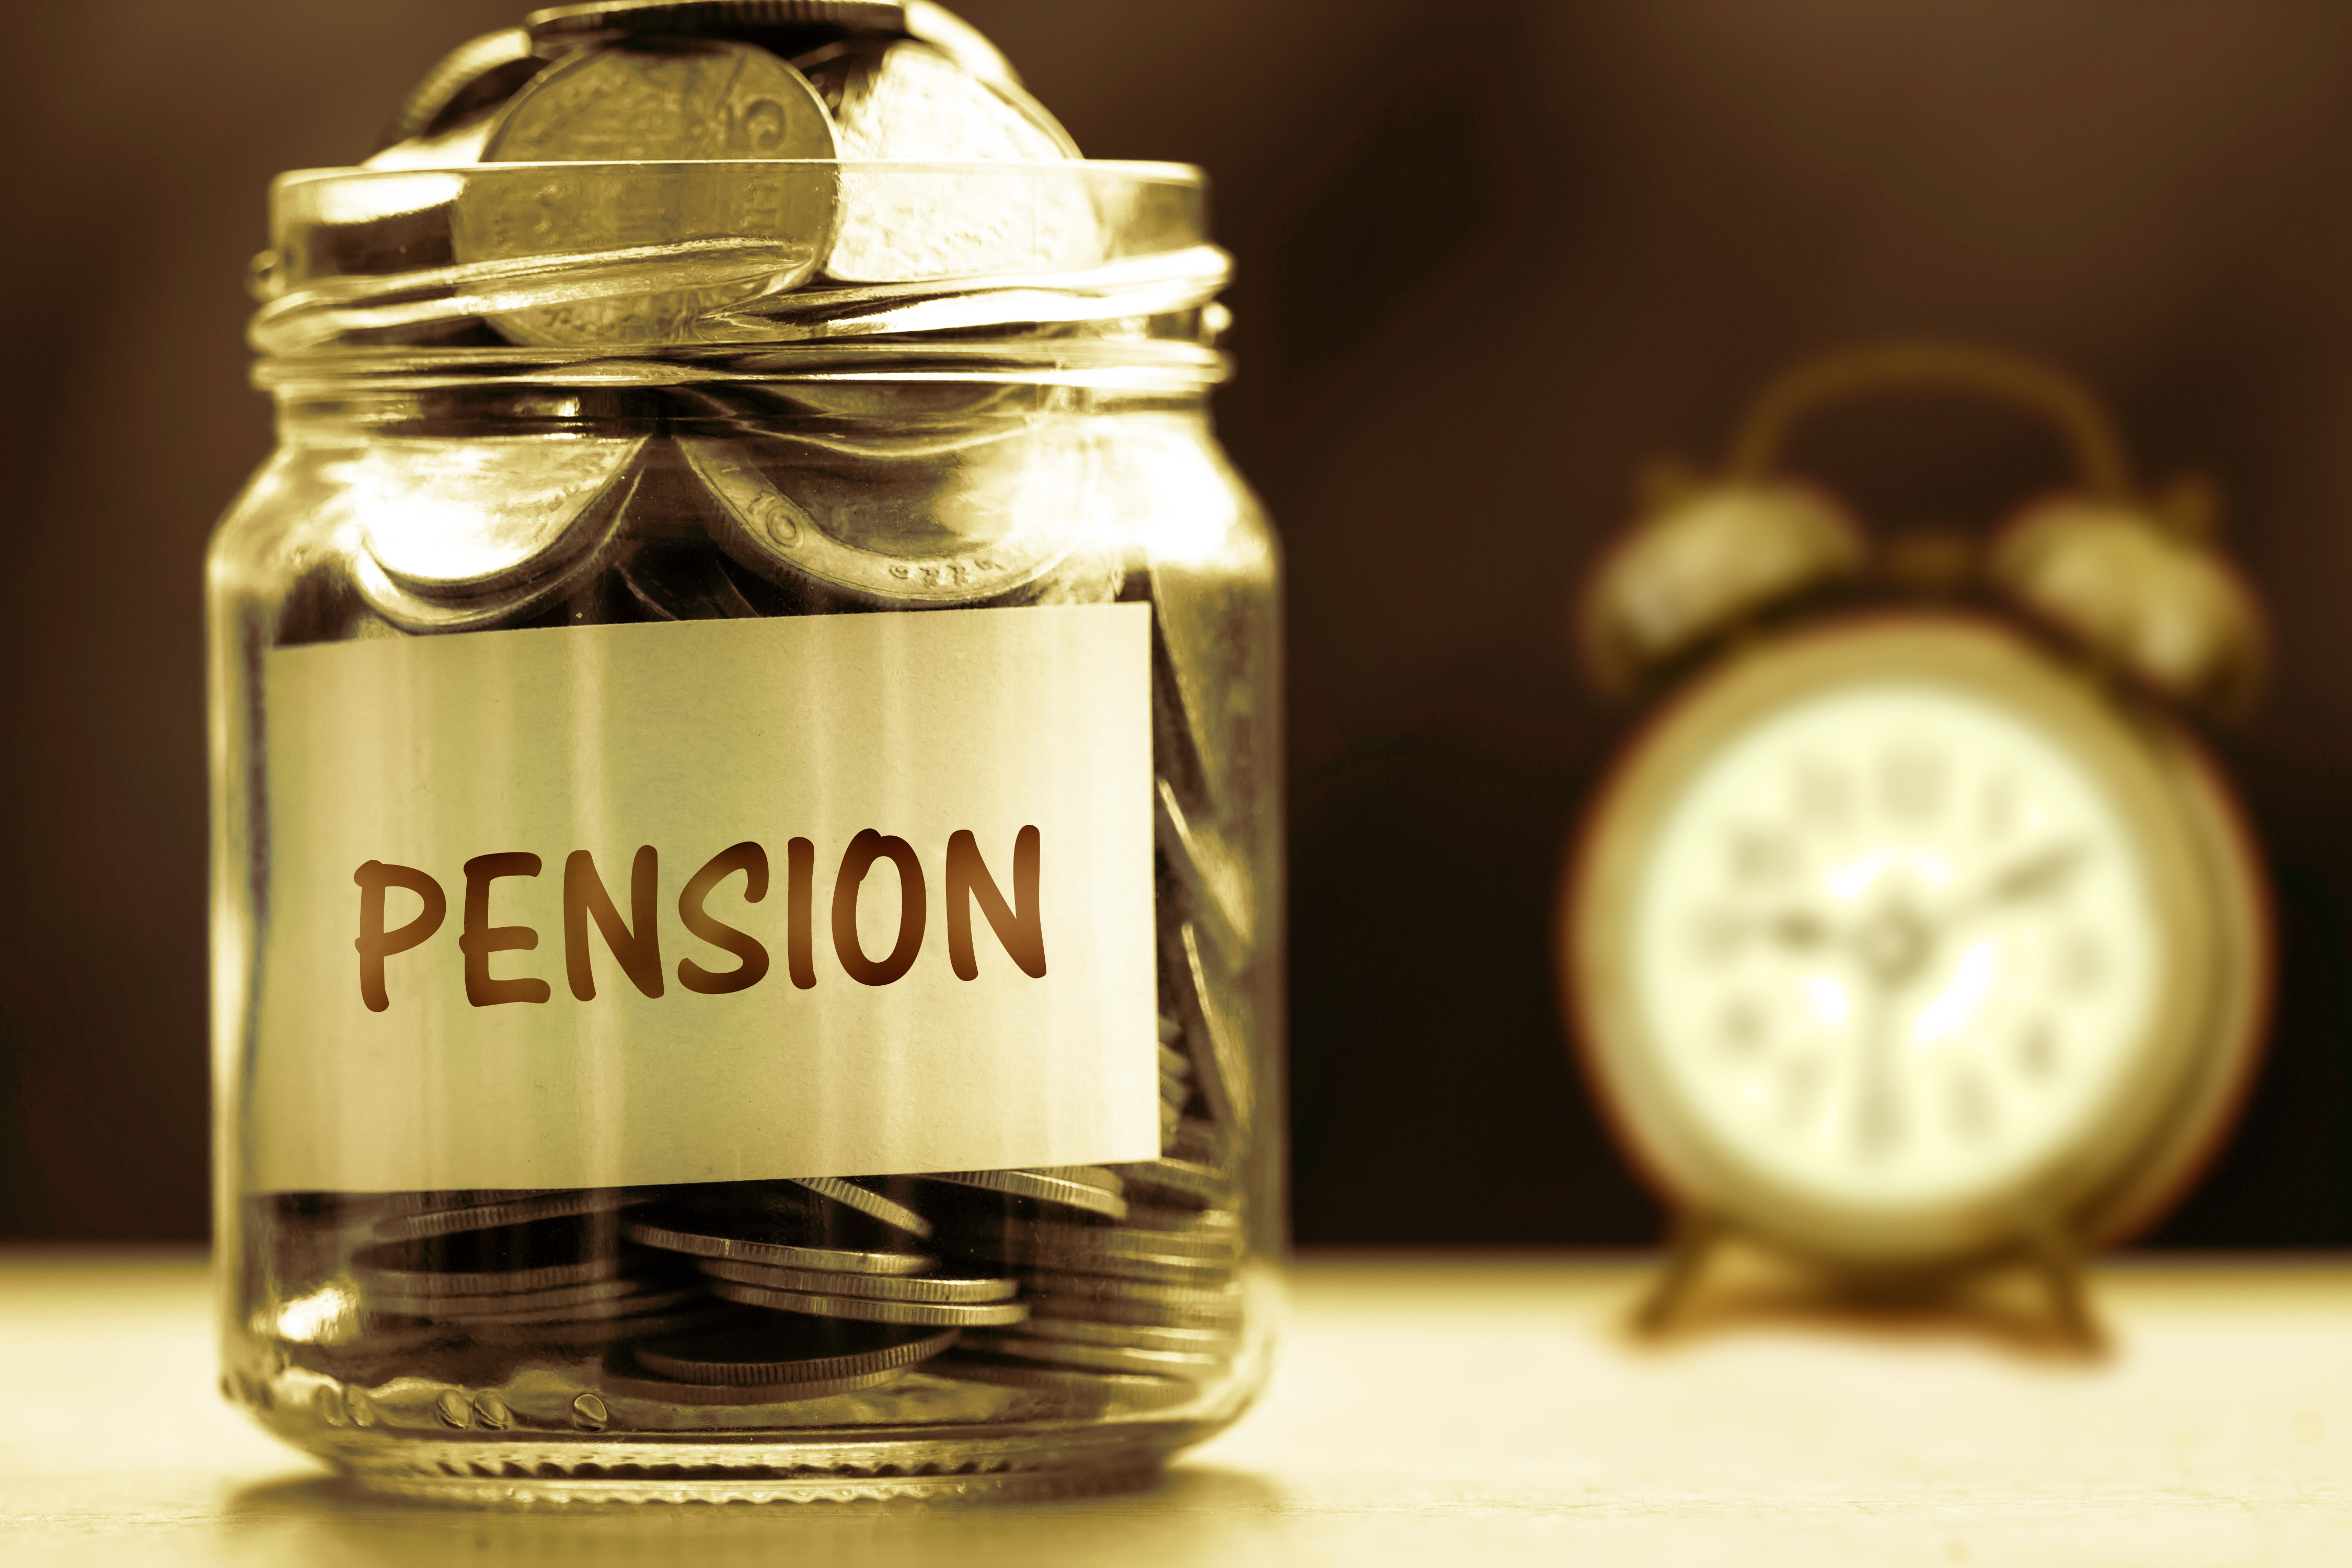 Most People in the Dark About Pension Details